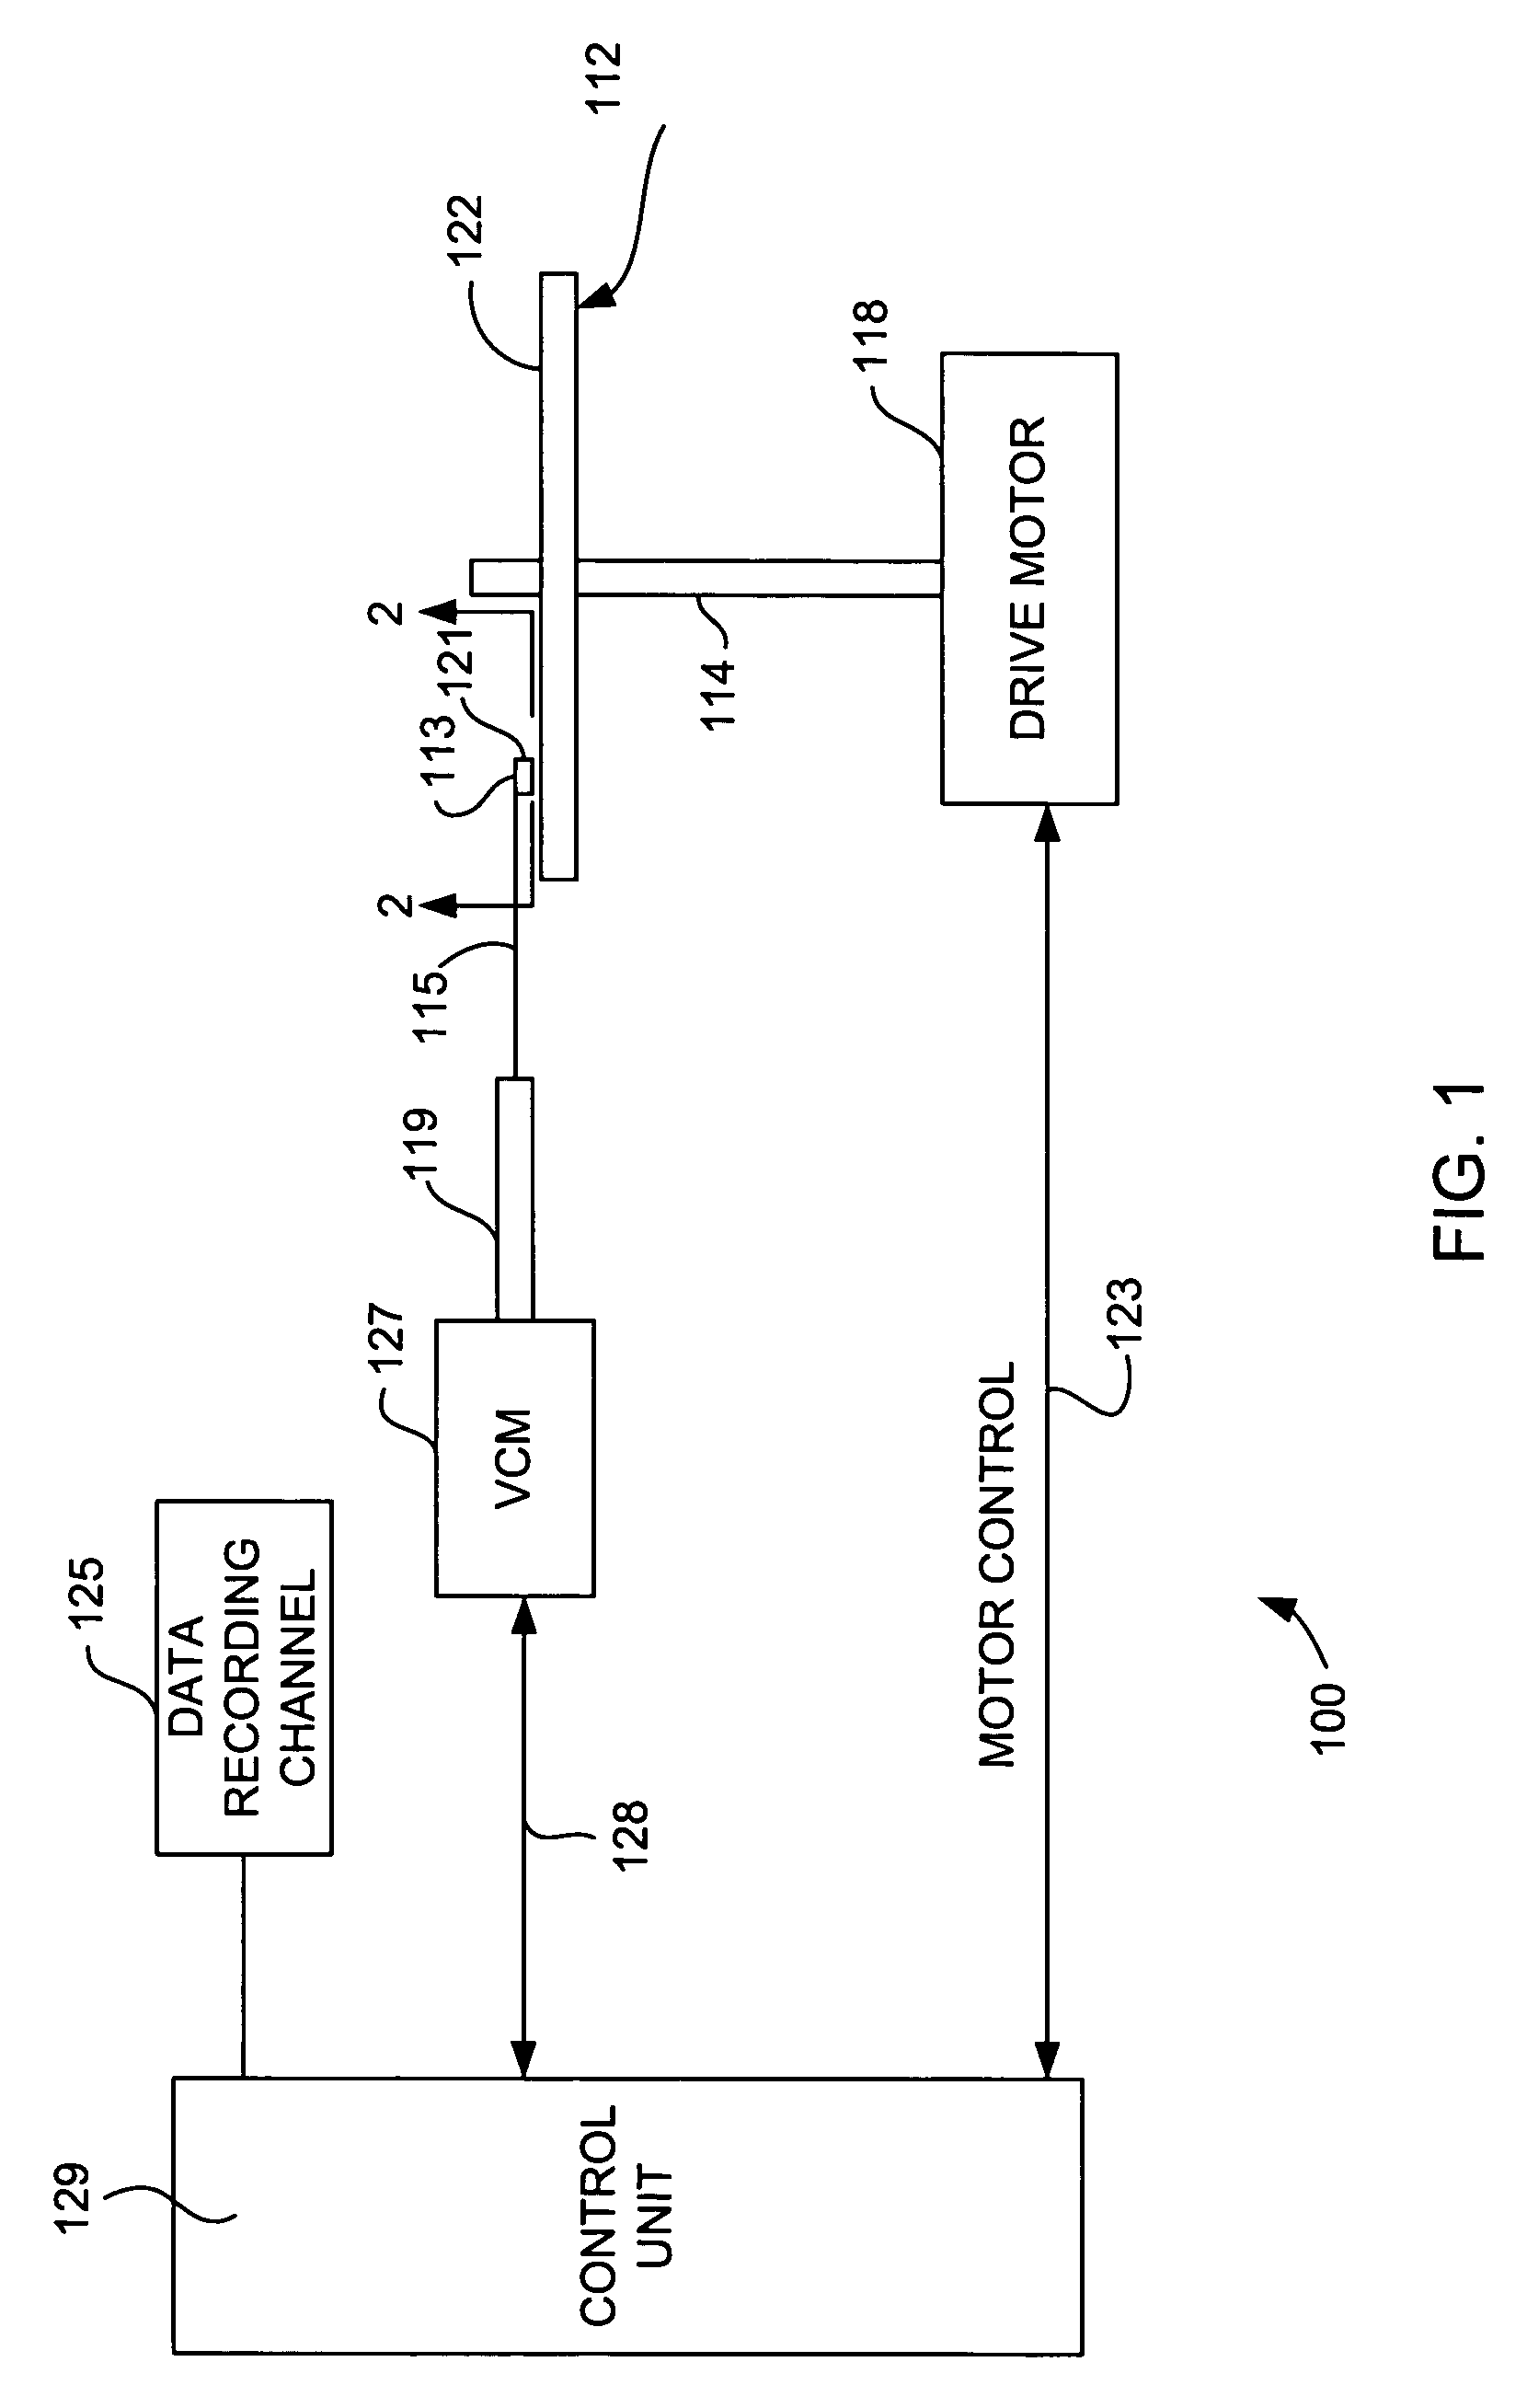 Flux shunt structure for reducing return pole corner fields in a perpendicular magnetic recording head